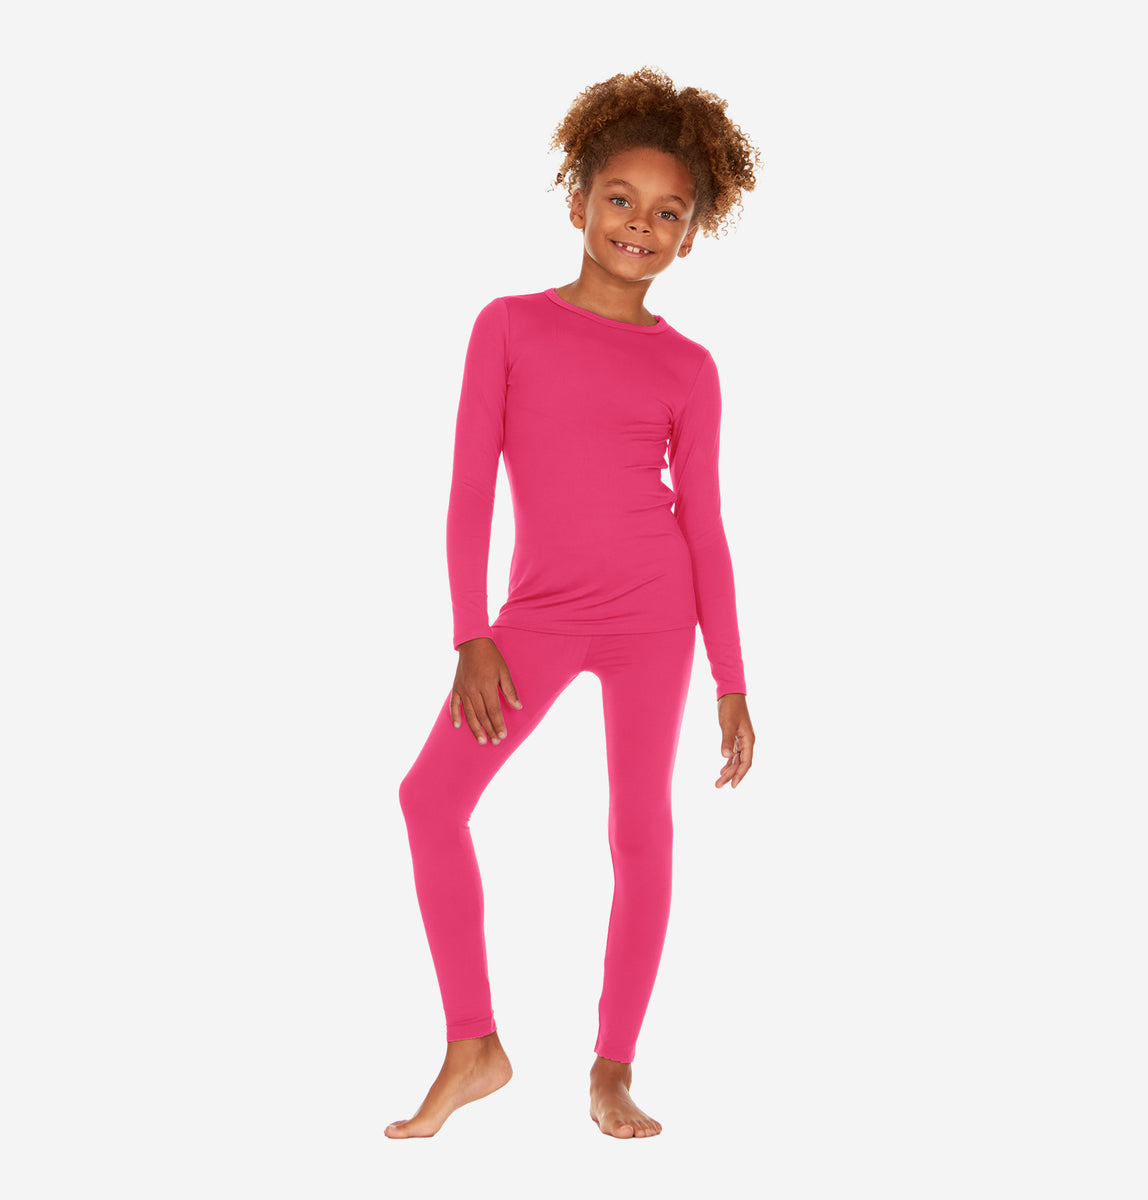 Thermajane Women's Fleece Lined Long Johns Base Layer Set for Cold Weather